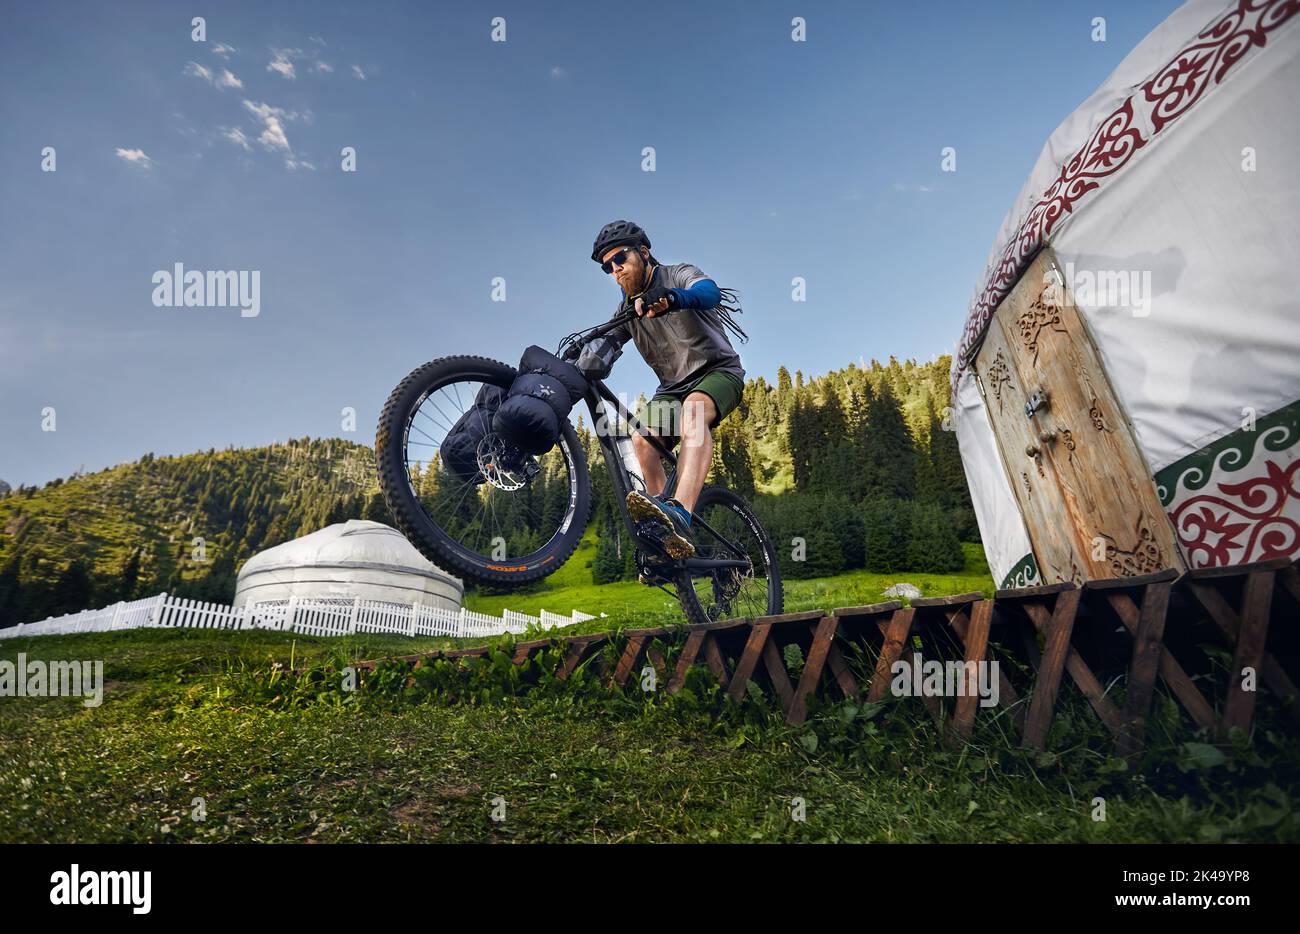 Man with dreadlocks and beard ride and jump at mountain bike with tourist bags near Nomad Yurt house in beautiful mountain valley in Almaty, Kazakhsta Stock Photo